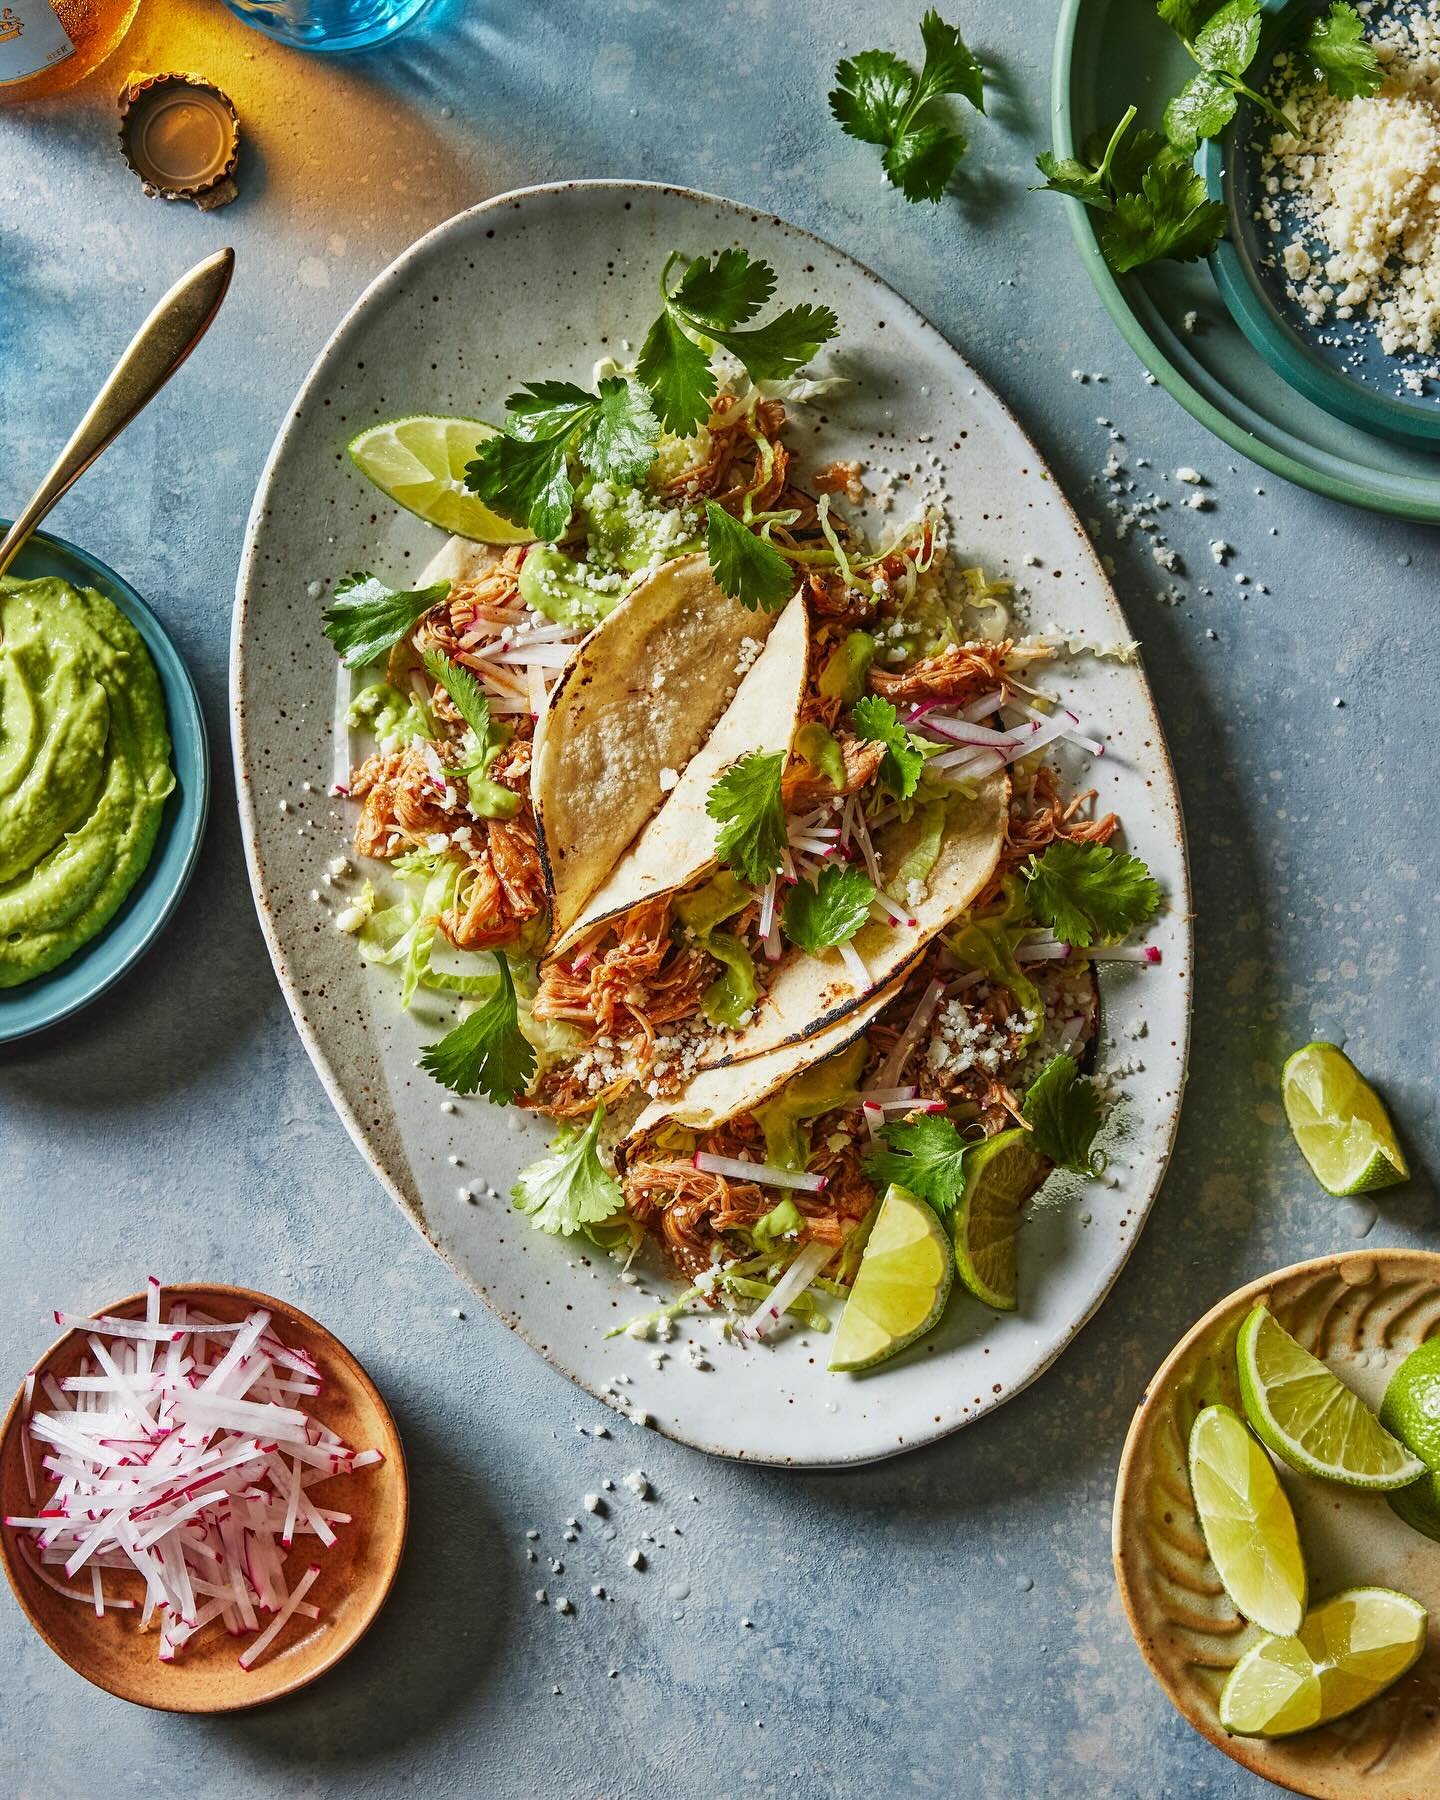 Beer Braised Chicken Tacos - for this shot @adamfoodstyle packed a party on a plate and @thedefineddish brought the flavor. This image is one of my favorites from Alex&rsquo;s new book. I love how all the accoutrements dance around the page, adding a